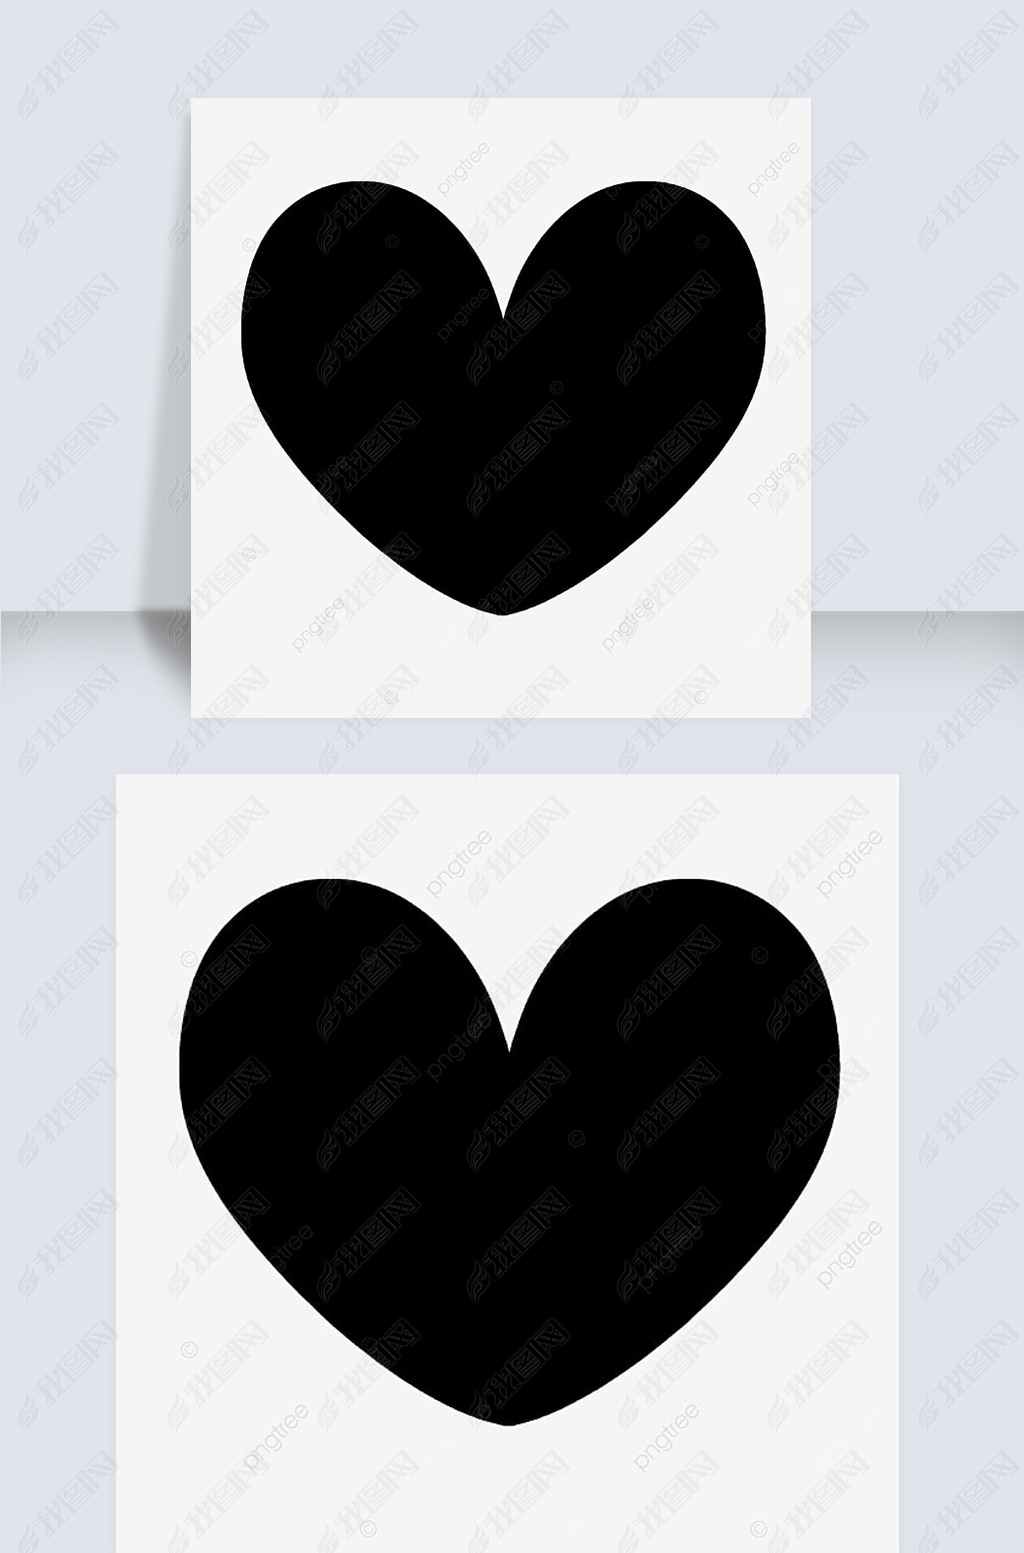 heart clipart black and whiteڰ